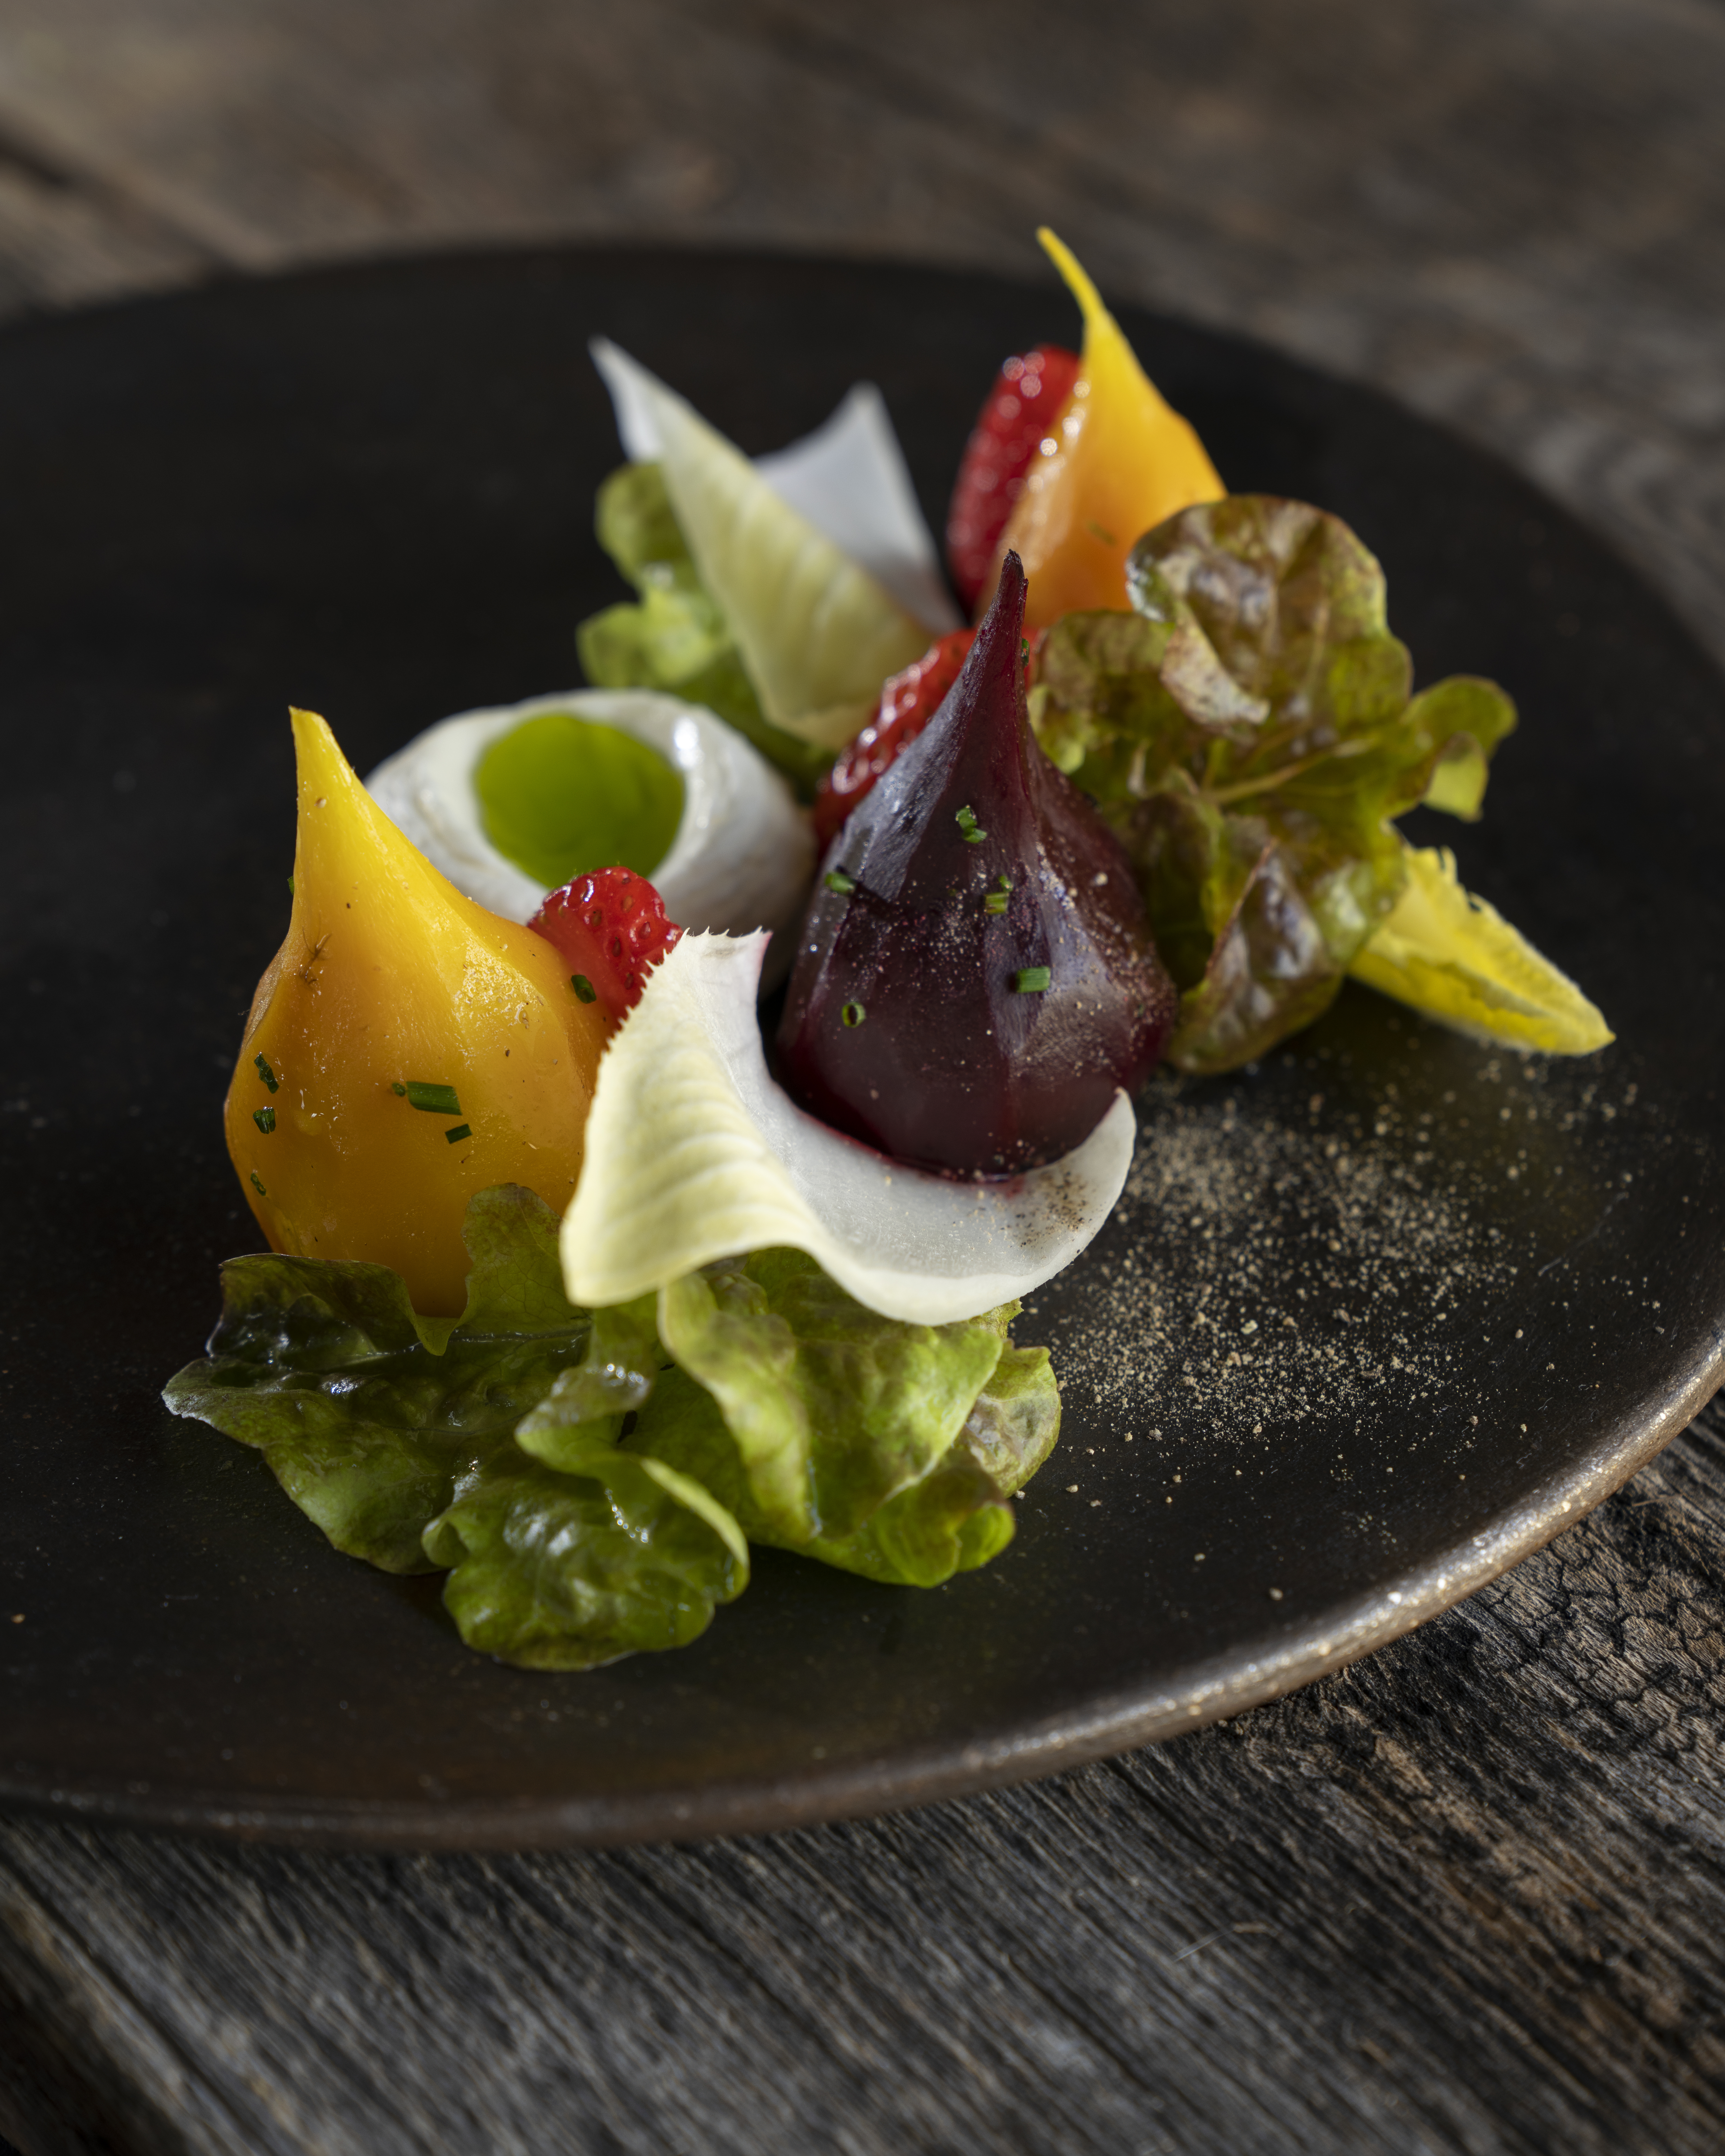 Roasted Baby Beets & Pickled Strawberry Salad with Goat Cheese Mousse, Fennel Oil, Belgium Endive, Lettuce, Cider & Mustard Seed Vinaigrette from Restaurant Martín